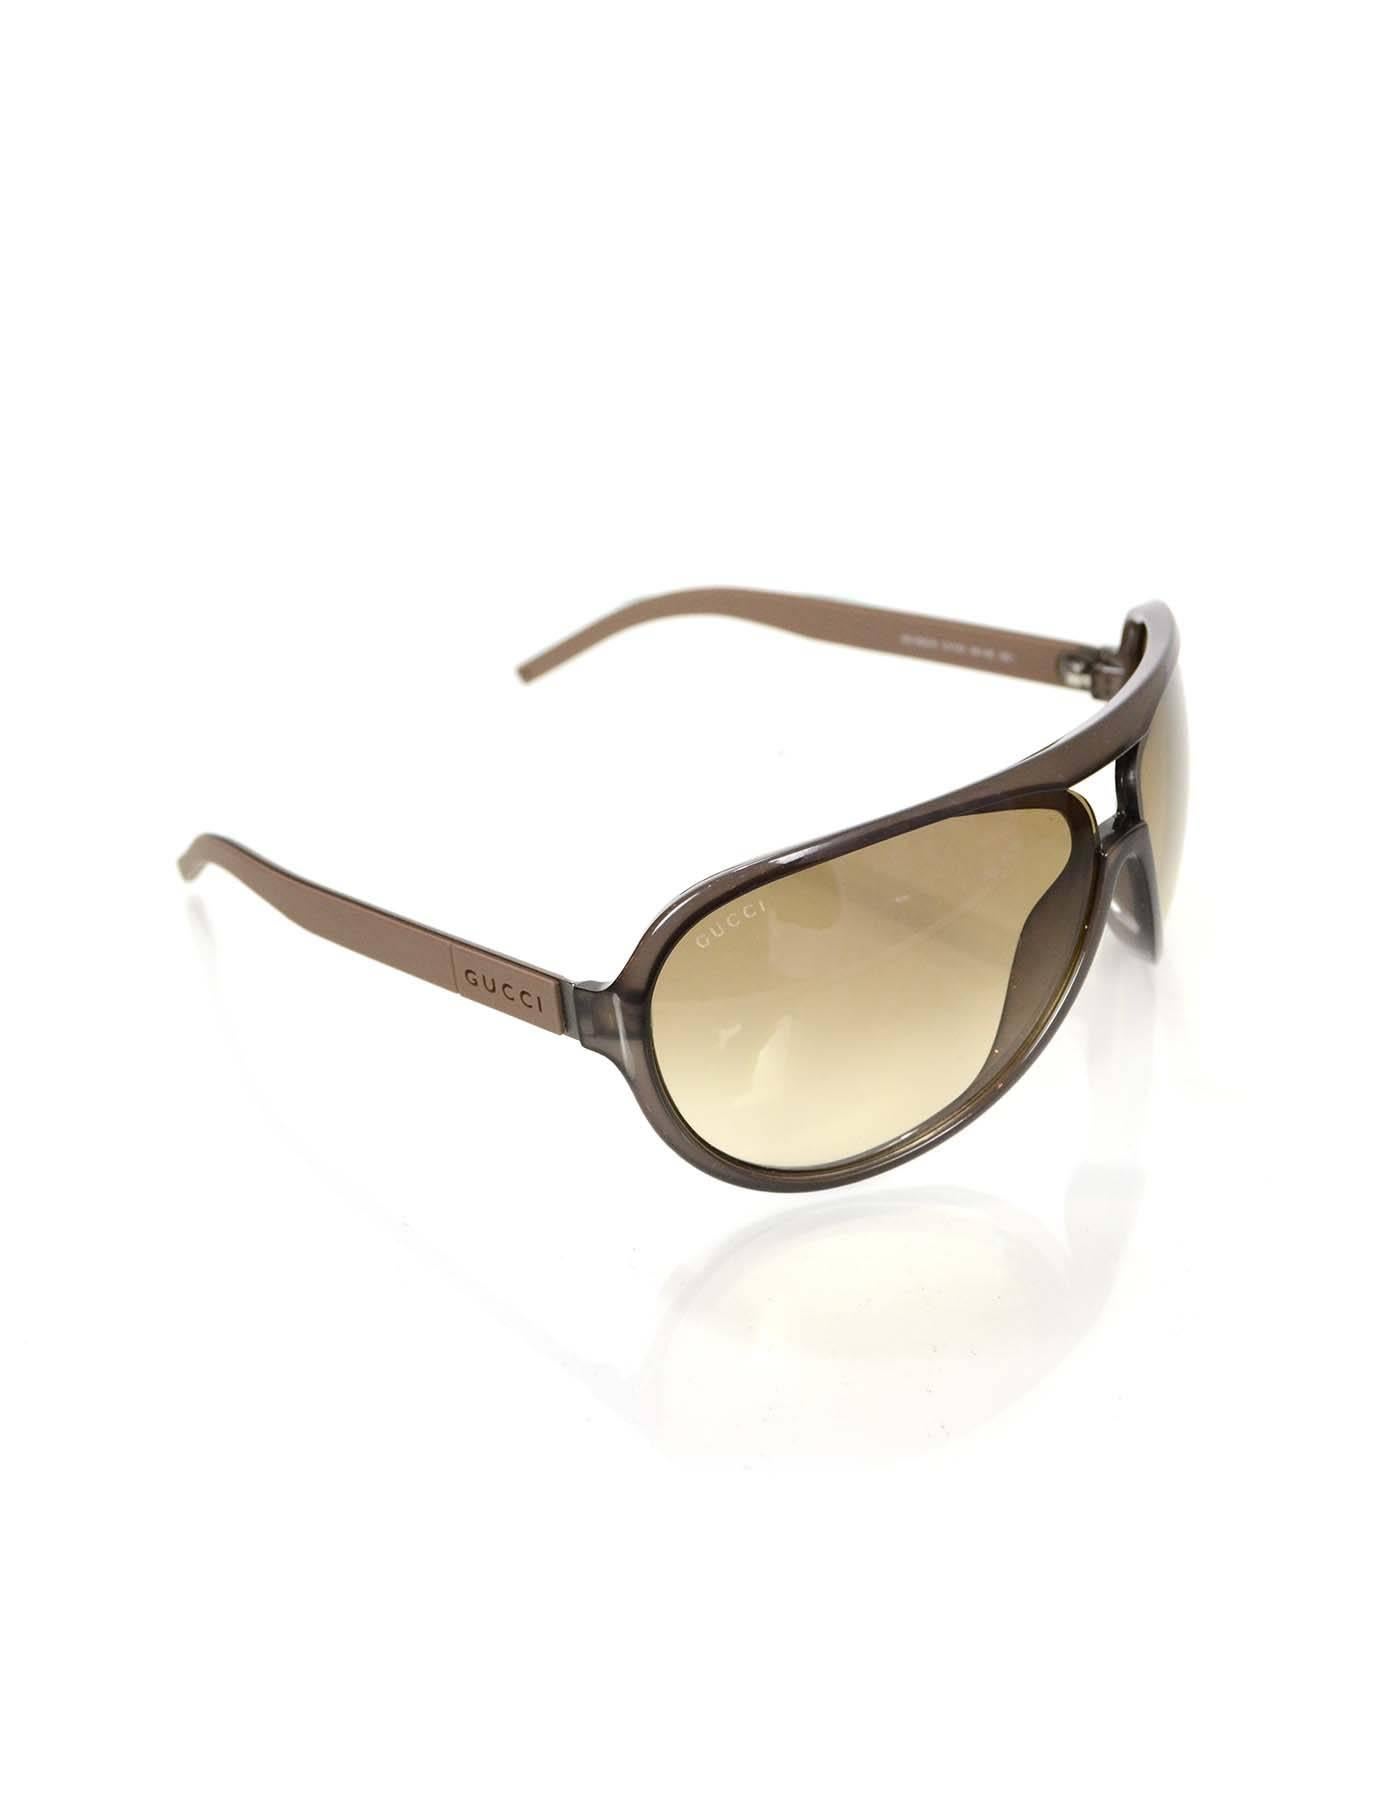 Gucci Brown Aviator Sunglasses

Made In: Italy
Color: Brown
Materials: Resin, metal
Overall Condition: Excellent pre-owned condition with the exception of very light surface marks
Includes: Gucci case
Measurements:
Length Across: